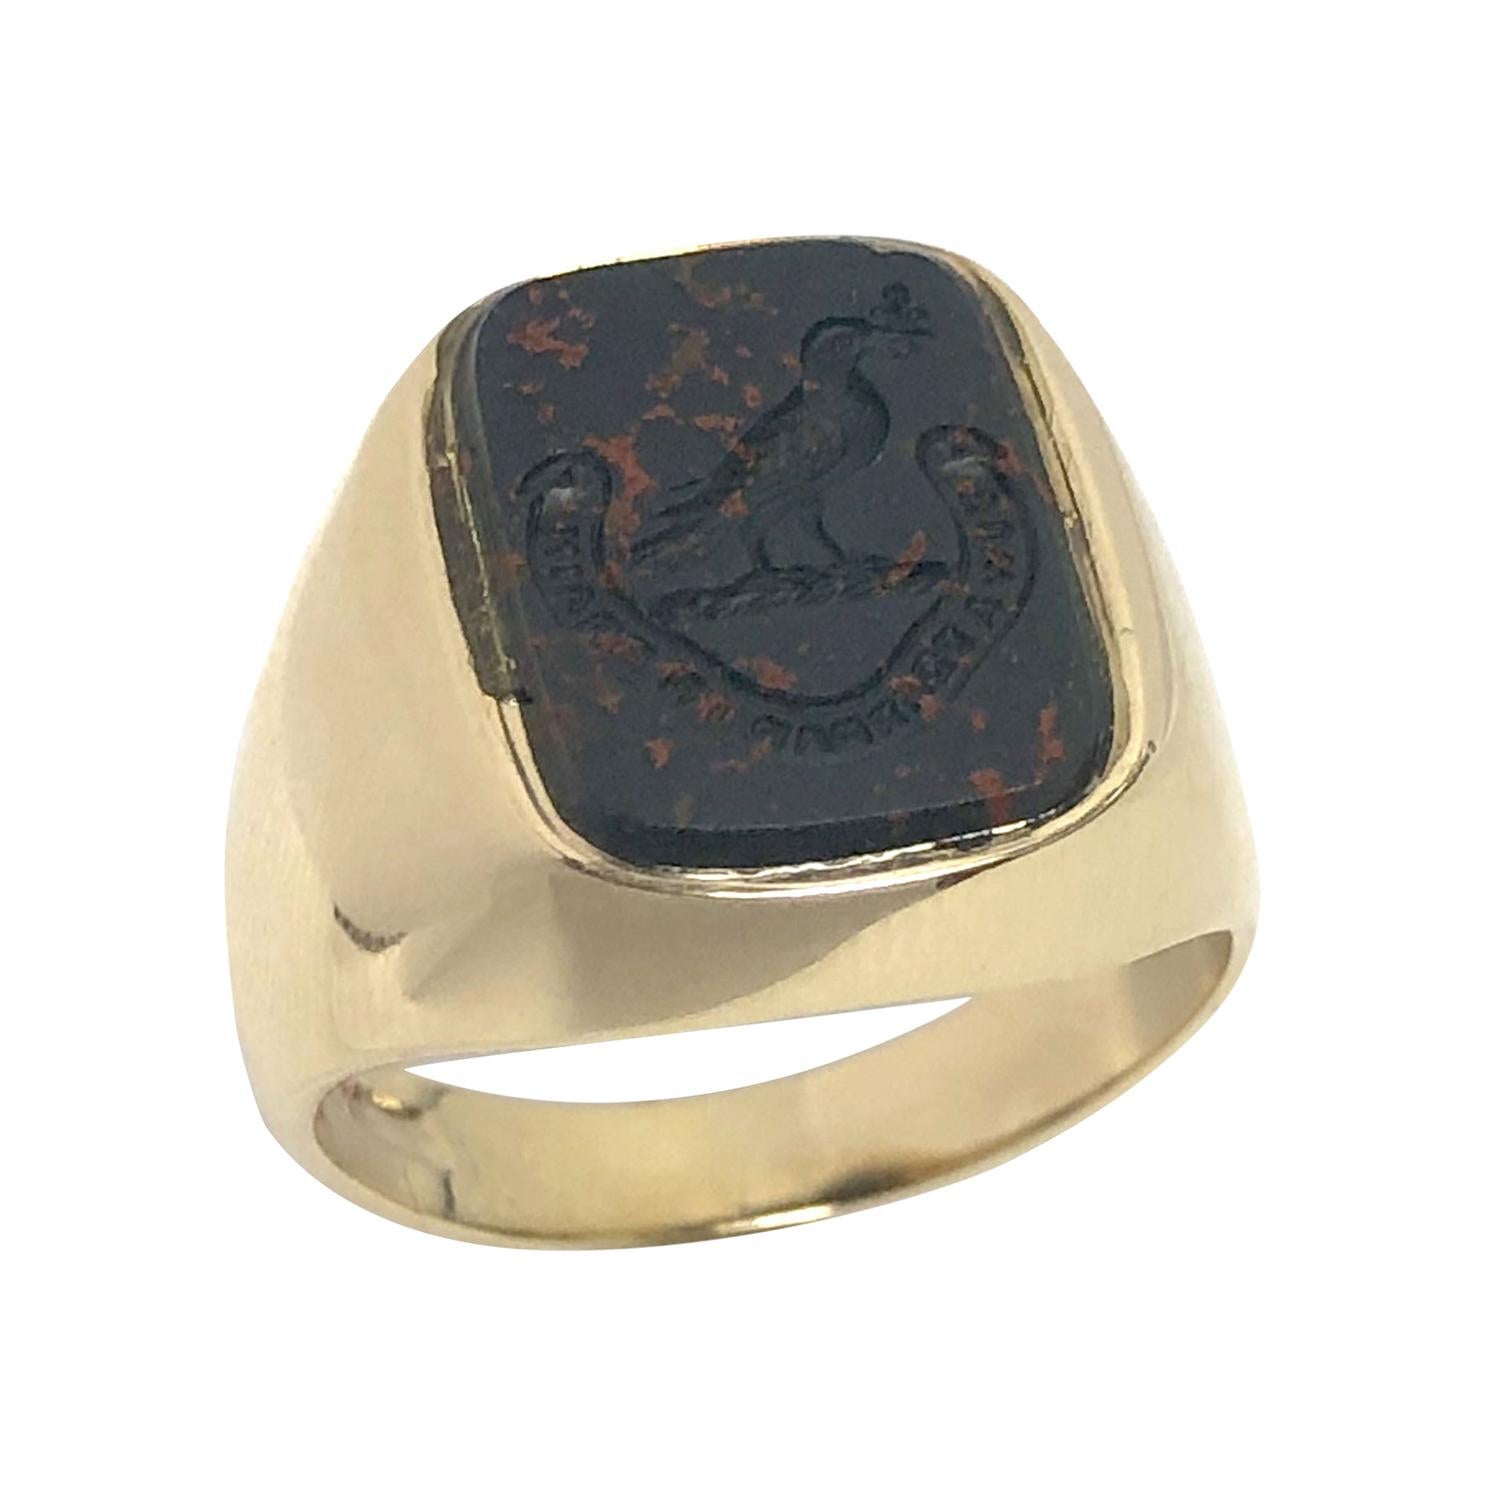 Antique Yellow Gold and Bloodstone Intaglio Signet Ring